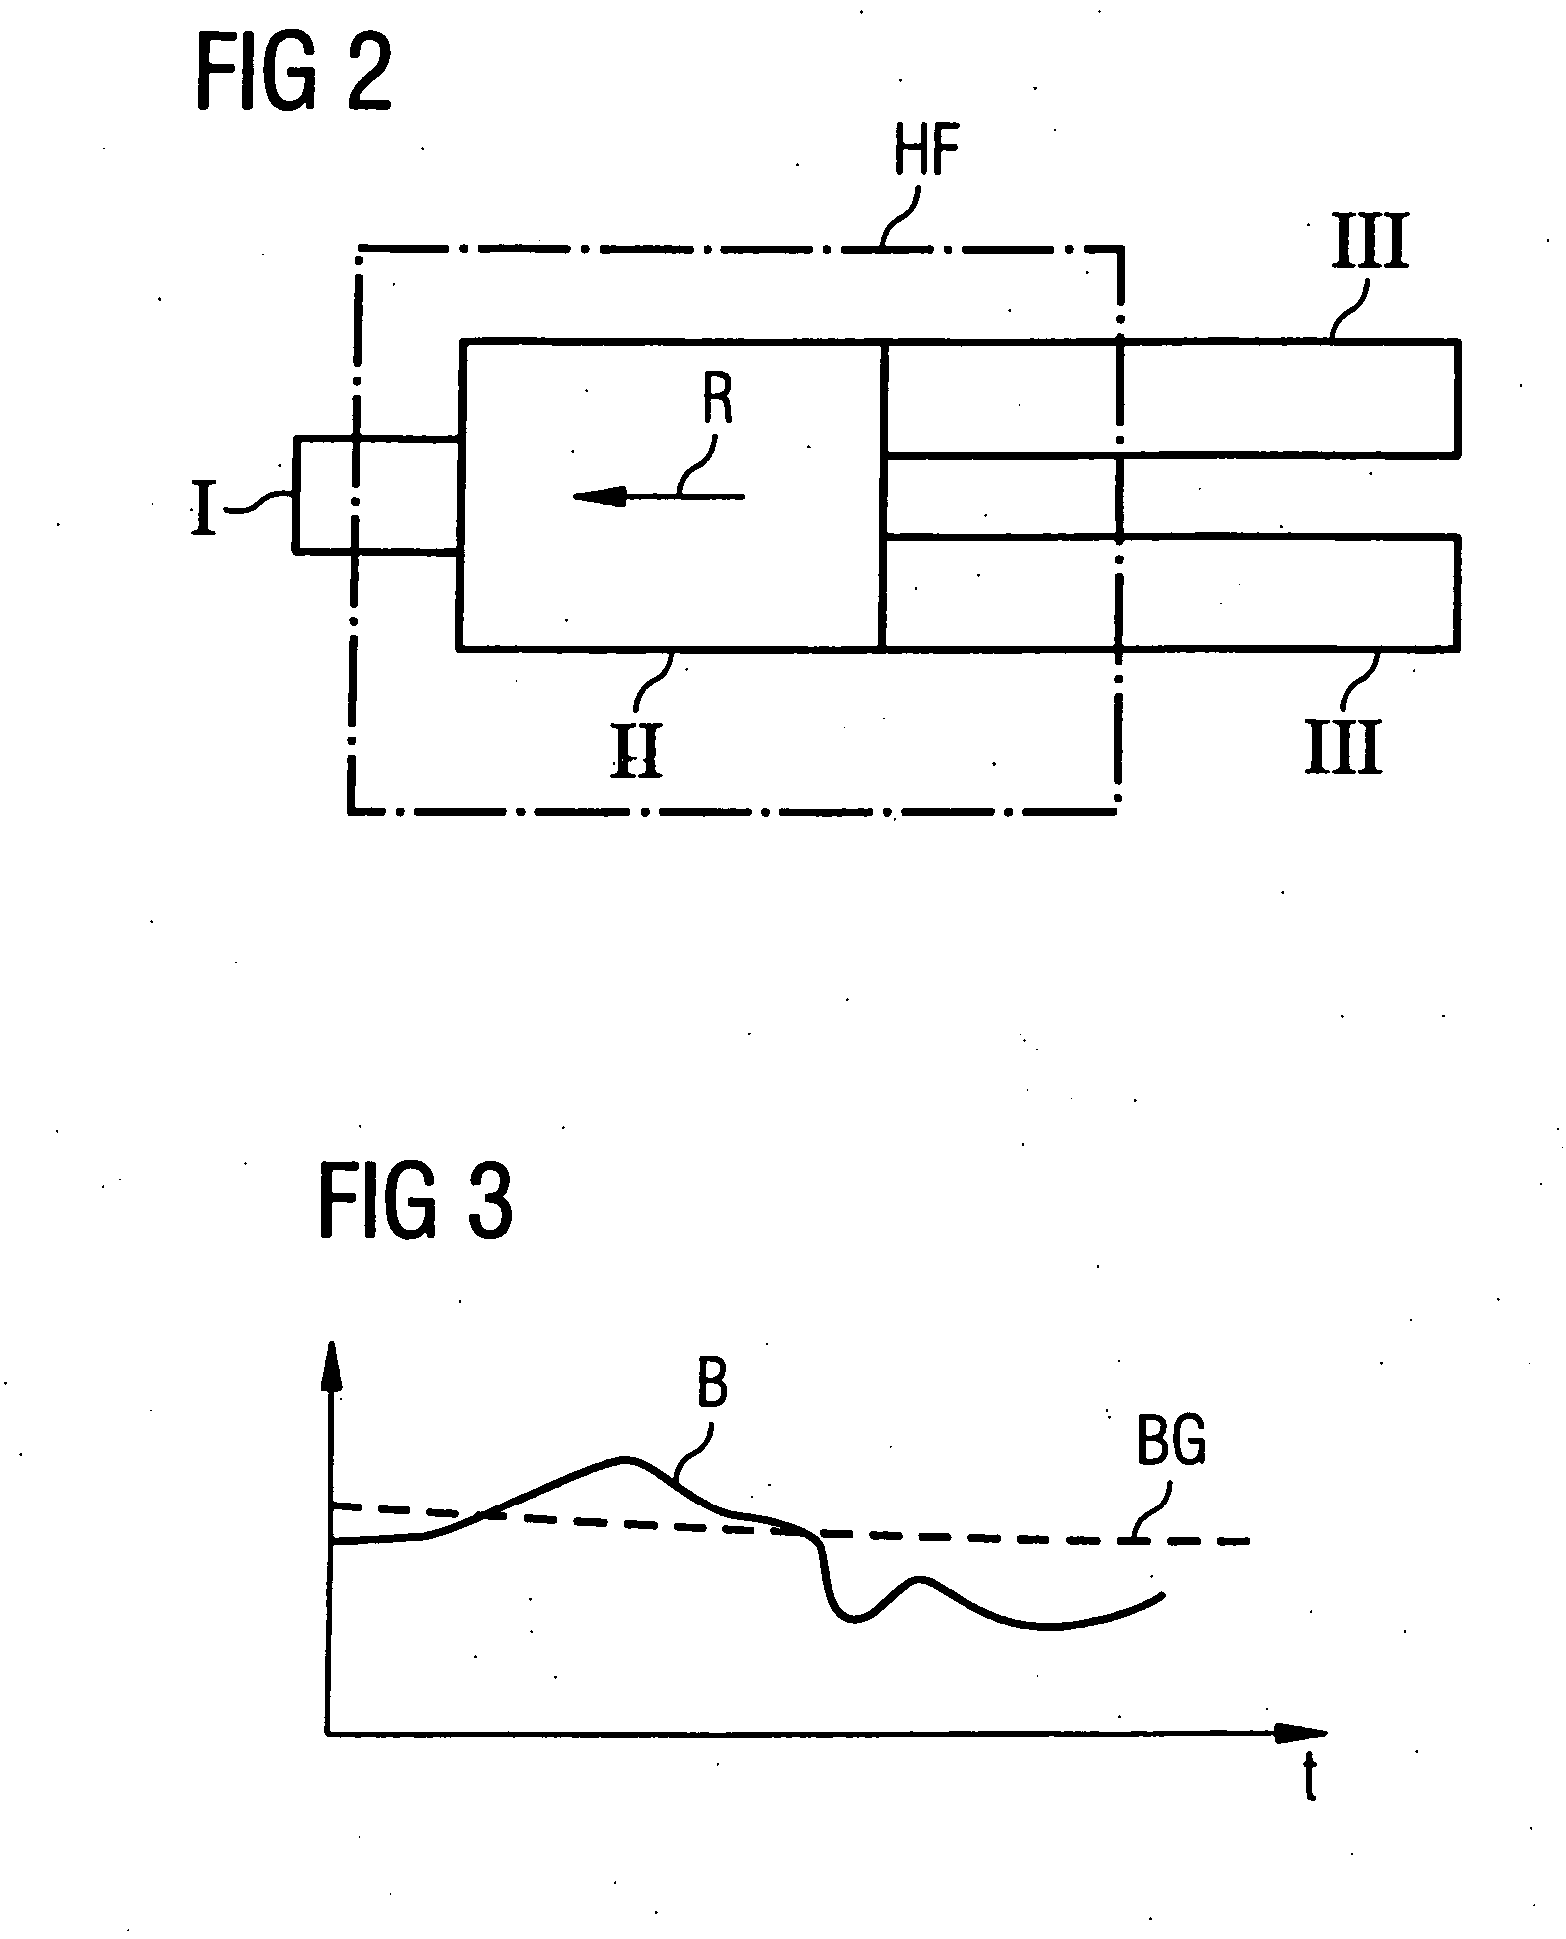 Method for controlling an RF transmission device, and MR apparatus and RF device for implementing the method